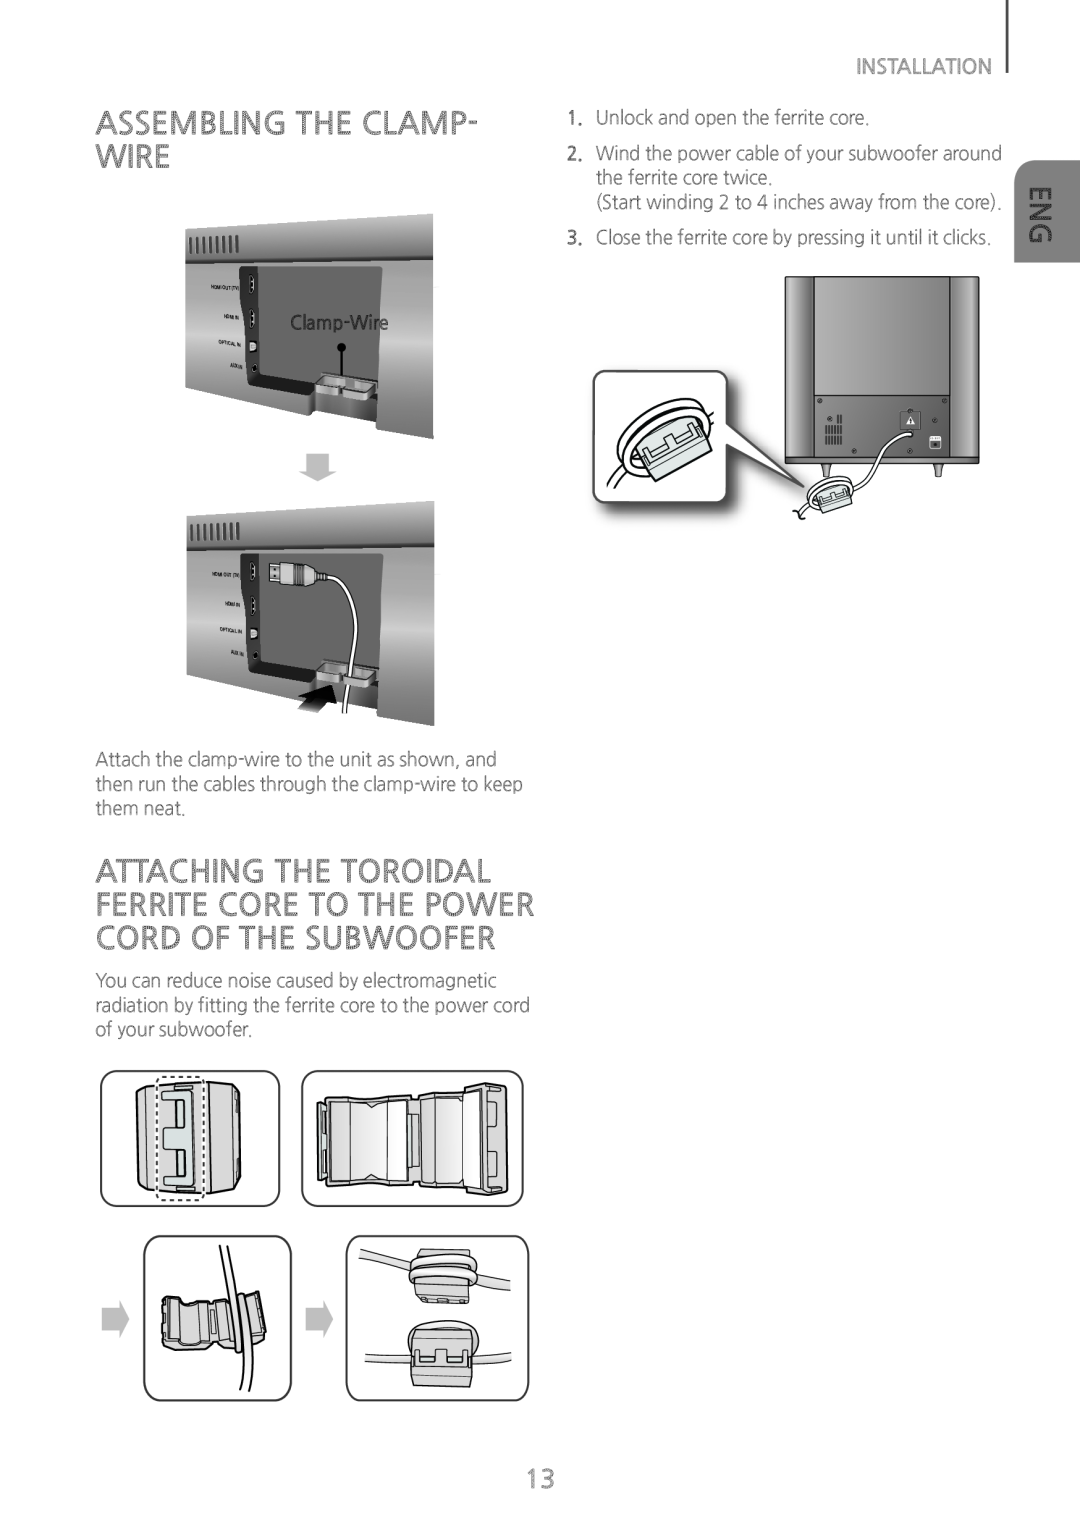 Samsung HWH7500 user manual Assembling the Clamp- wire, Installation 